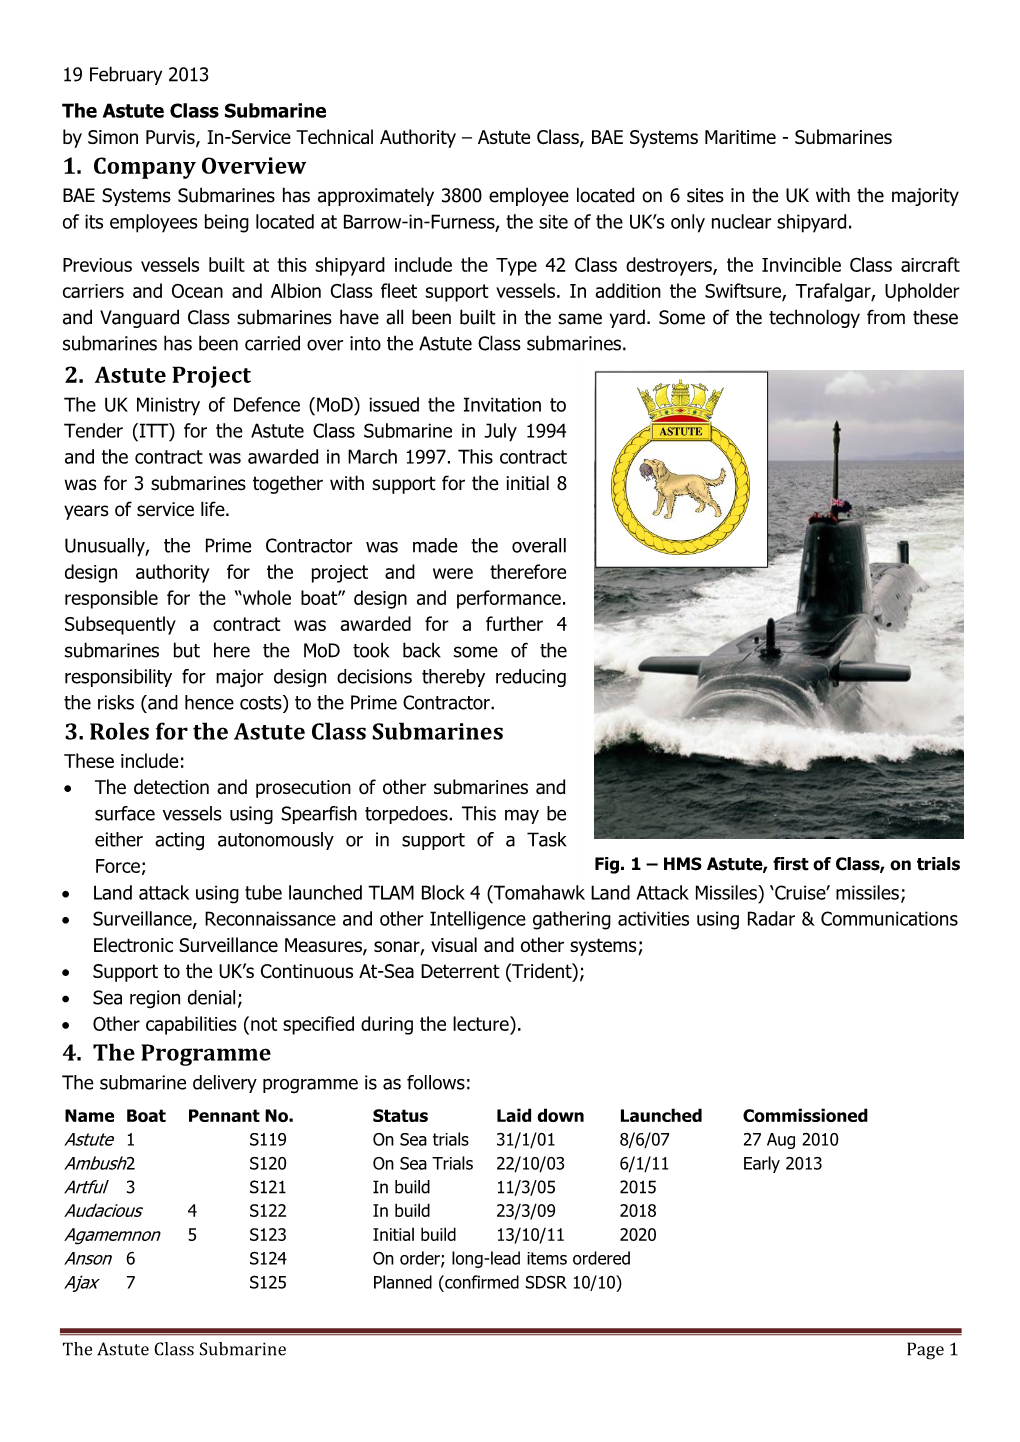 The Astute Class Submarine by Simon Purvis, In-Service Technical Authority – Astute Class, BAE Systems Maritime - Submarines 1